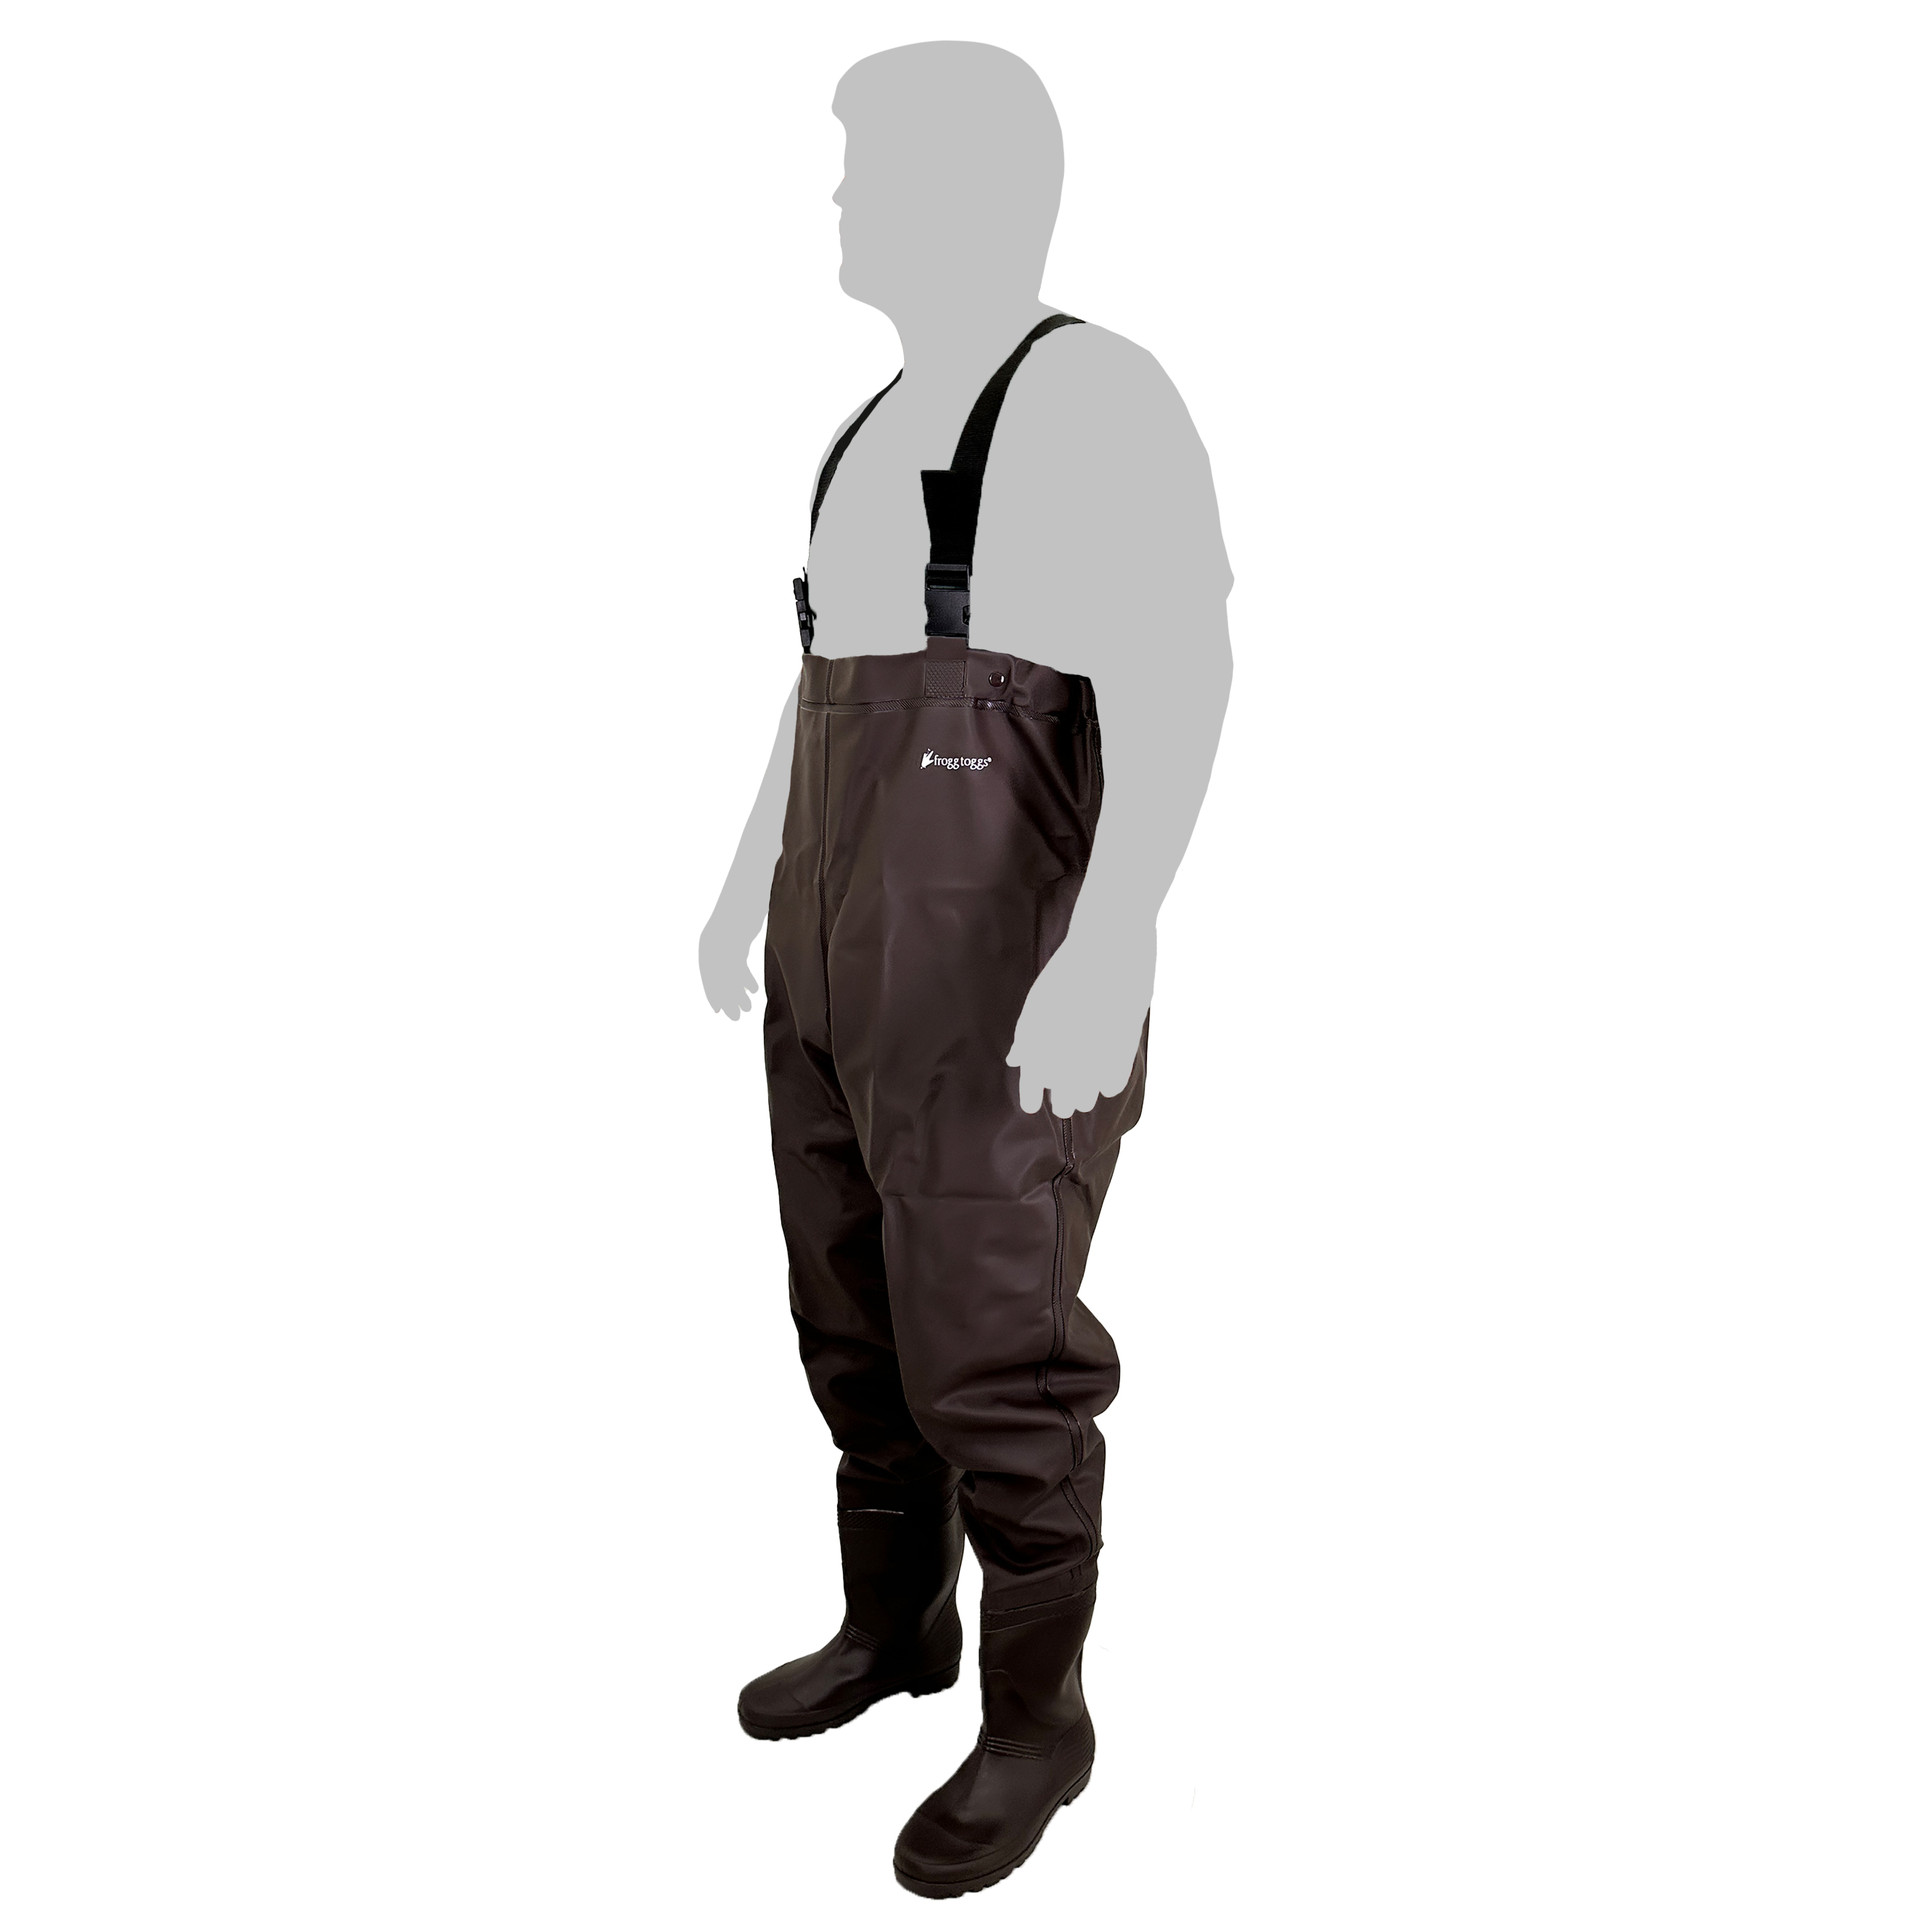 Frogg Toggs Men's Rana PVC Lug Chest Wader, Brown, Size 8 